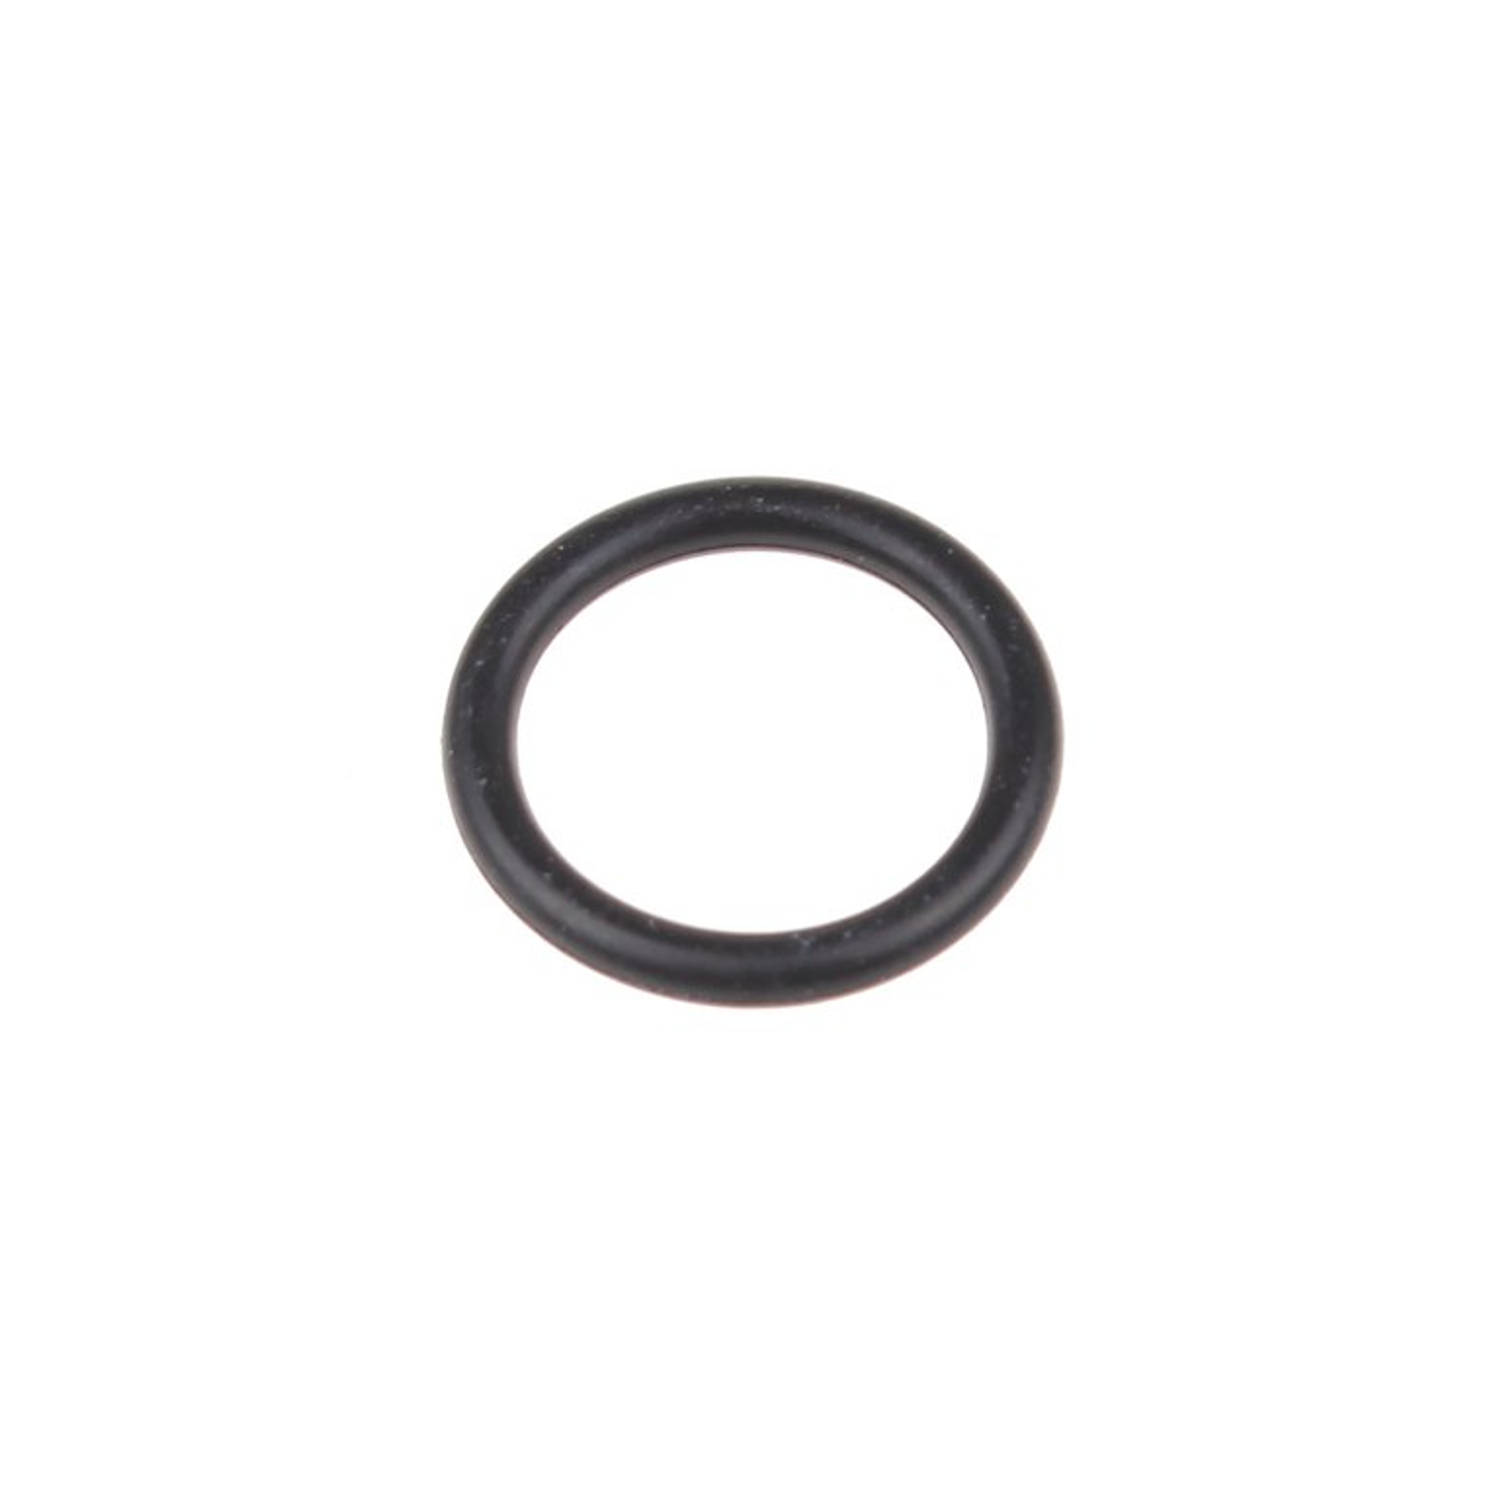 KARCHER - DICHTING O-RING 12,0-2,0 - 63621690